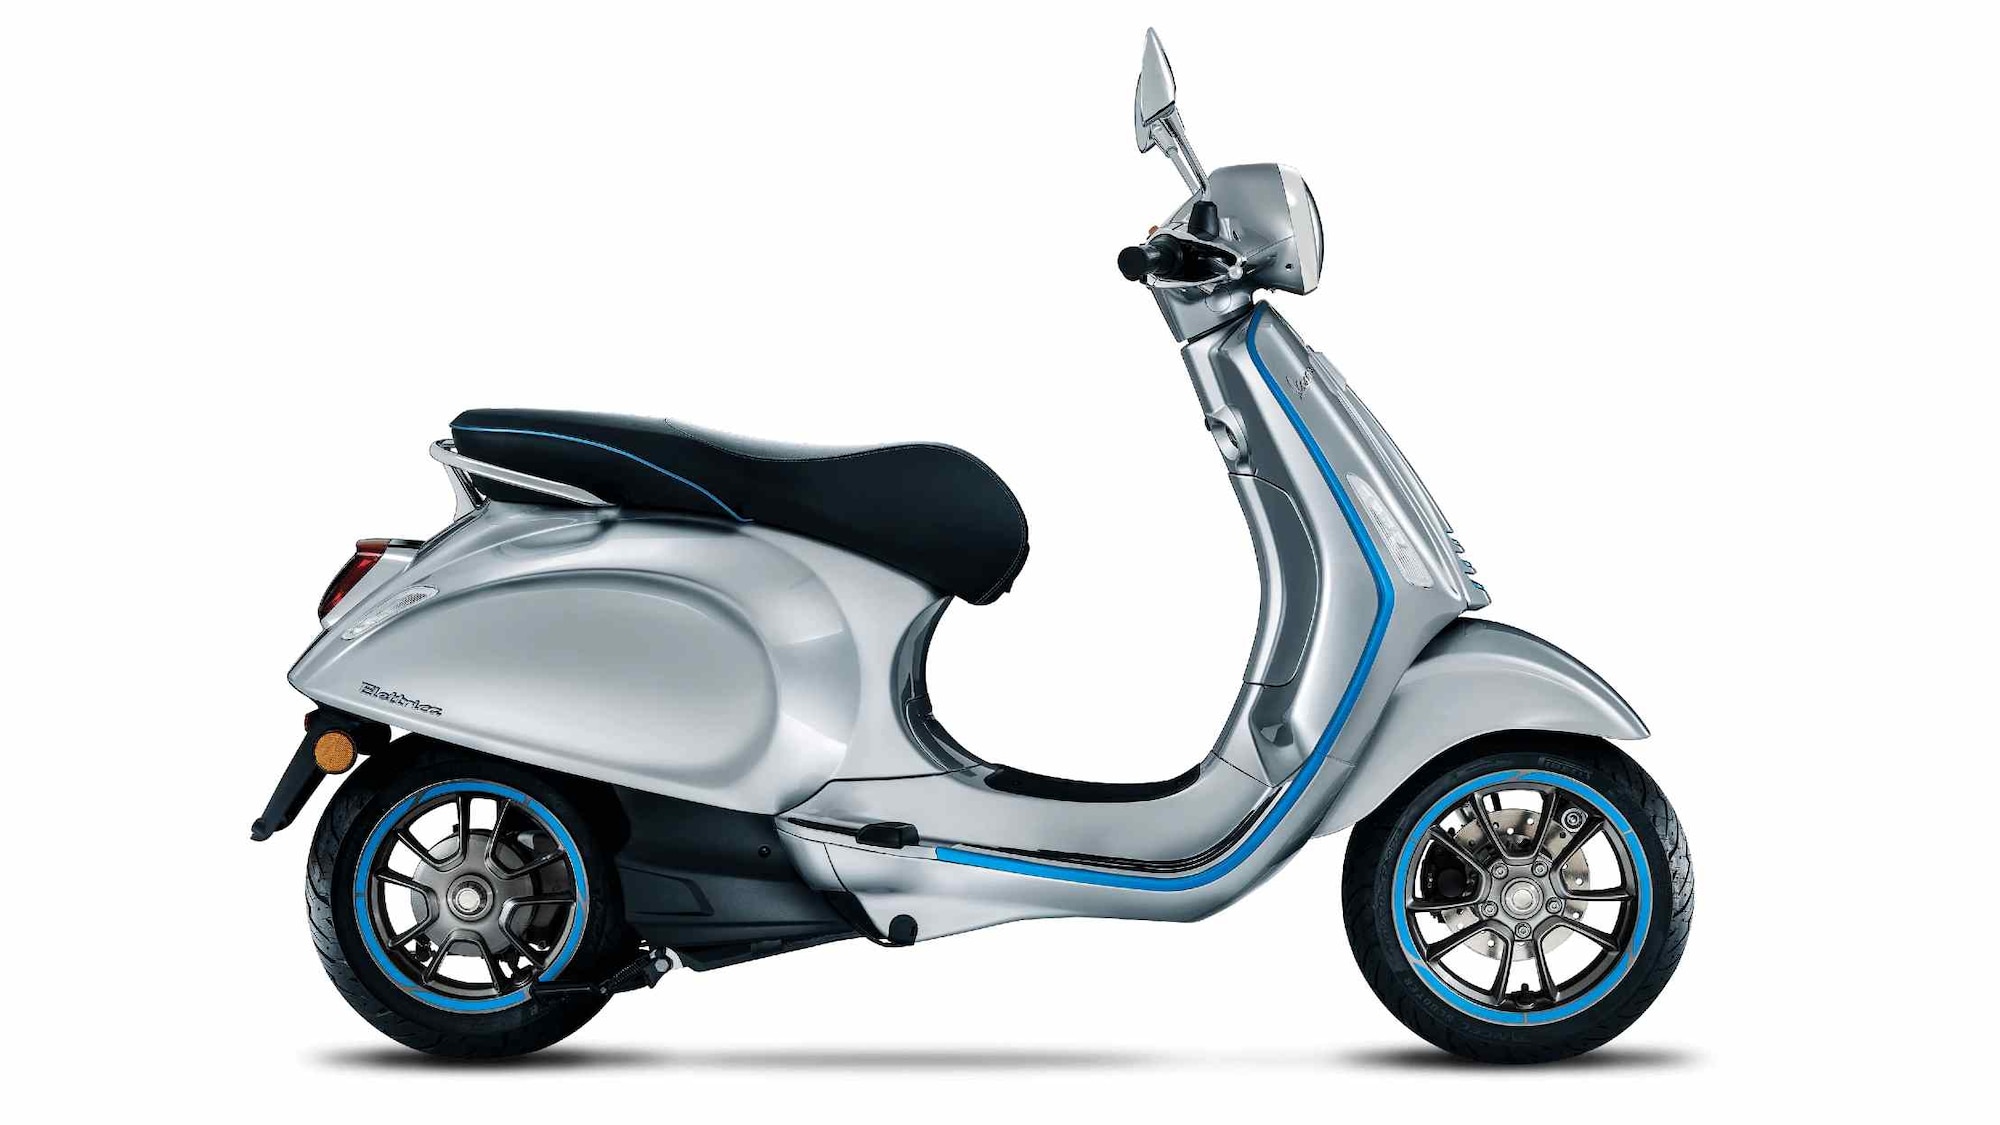 Vespa is currently developing an all-electric scooter for the Indian market. (Vespa Elettrica shown for representation only) Image: Piaggio